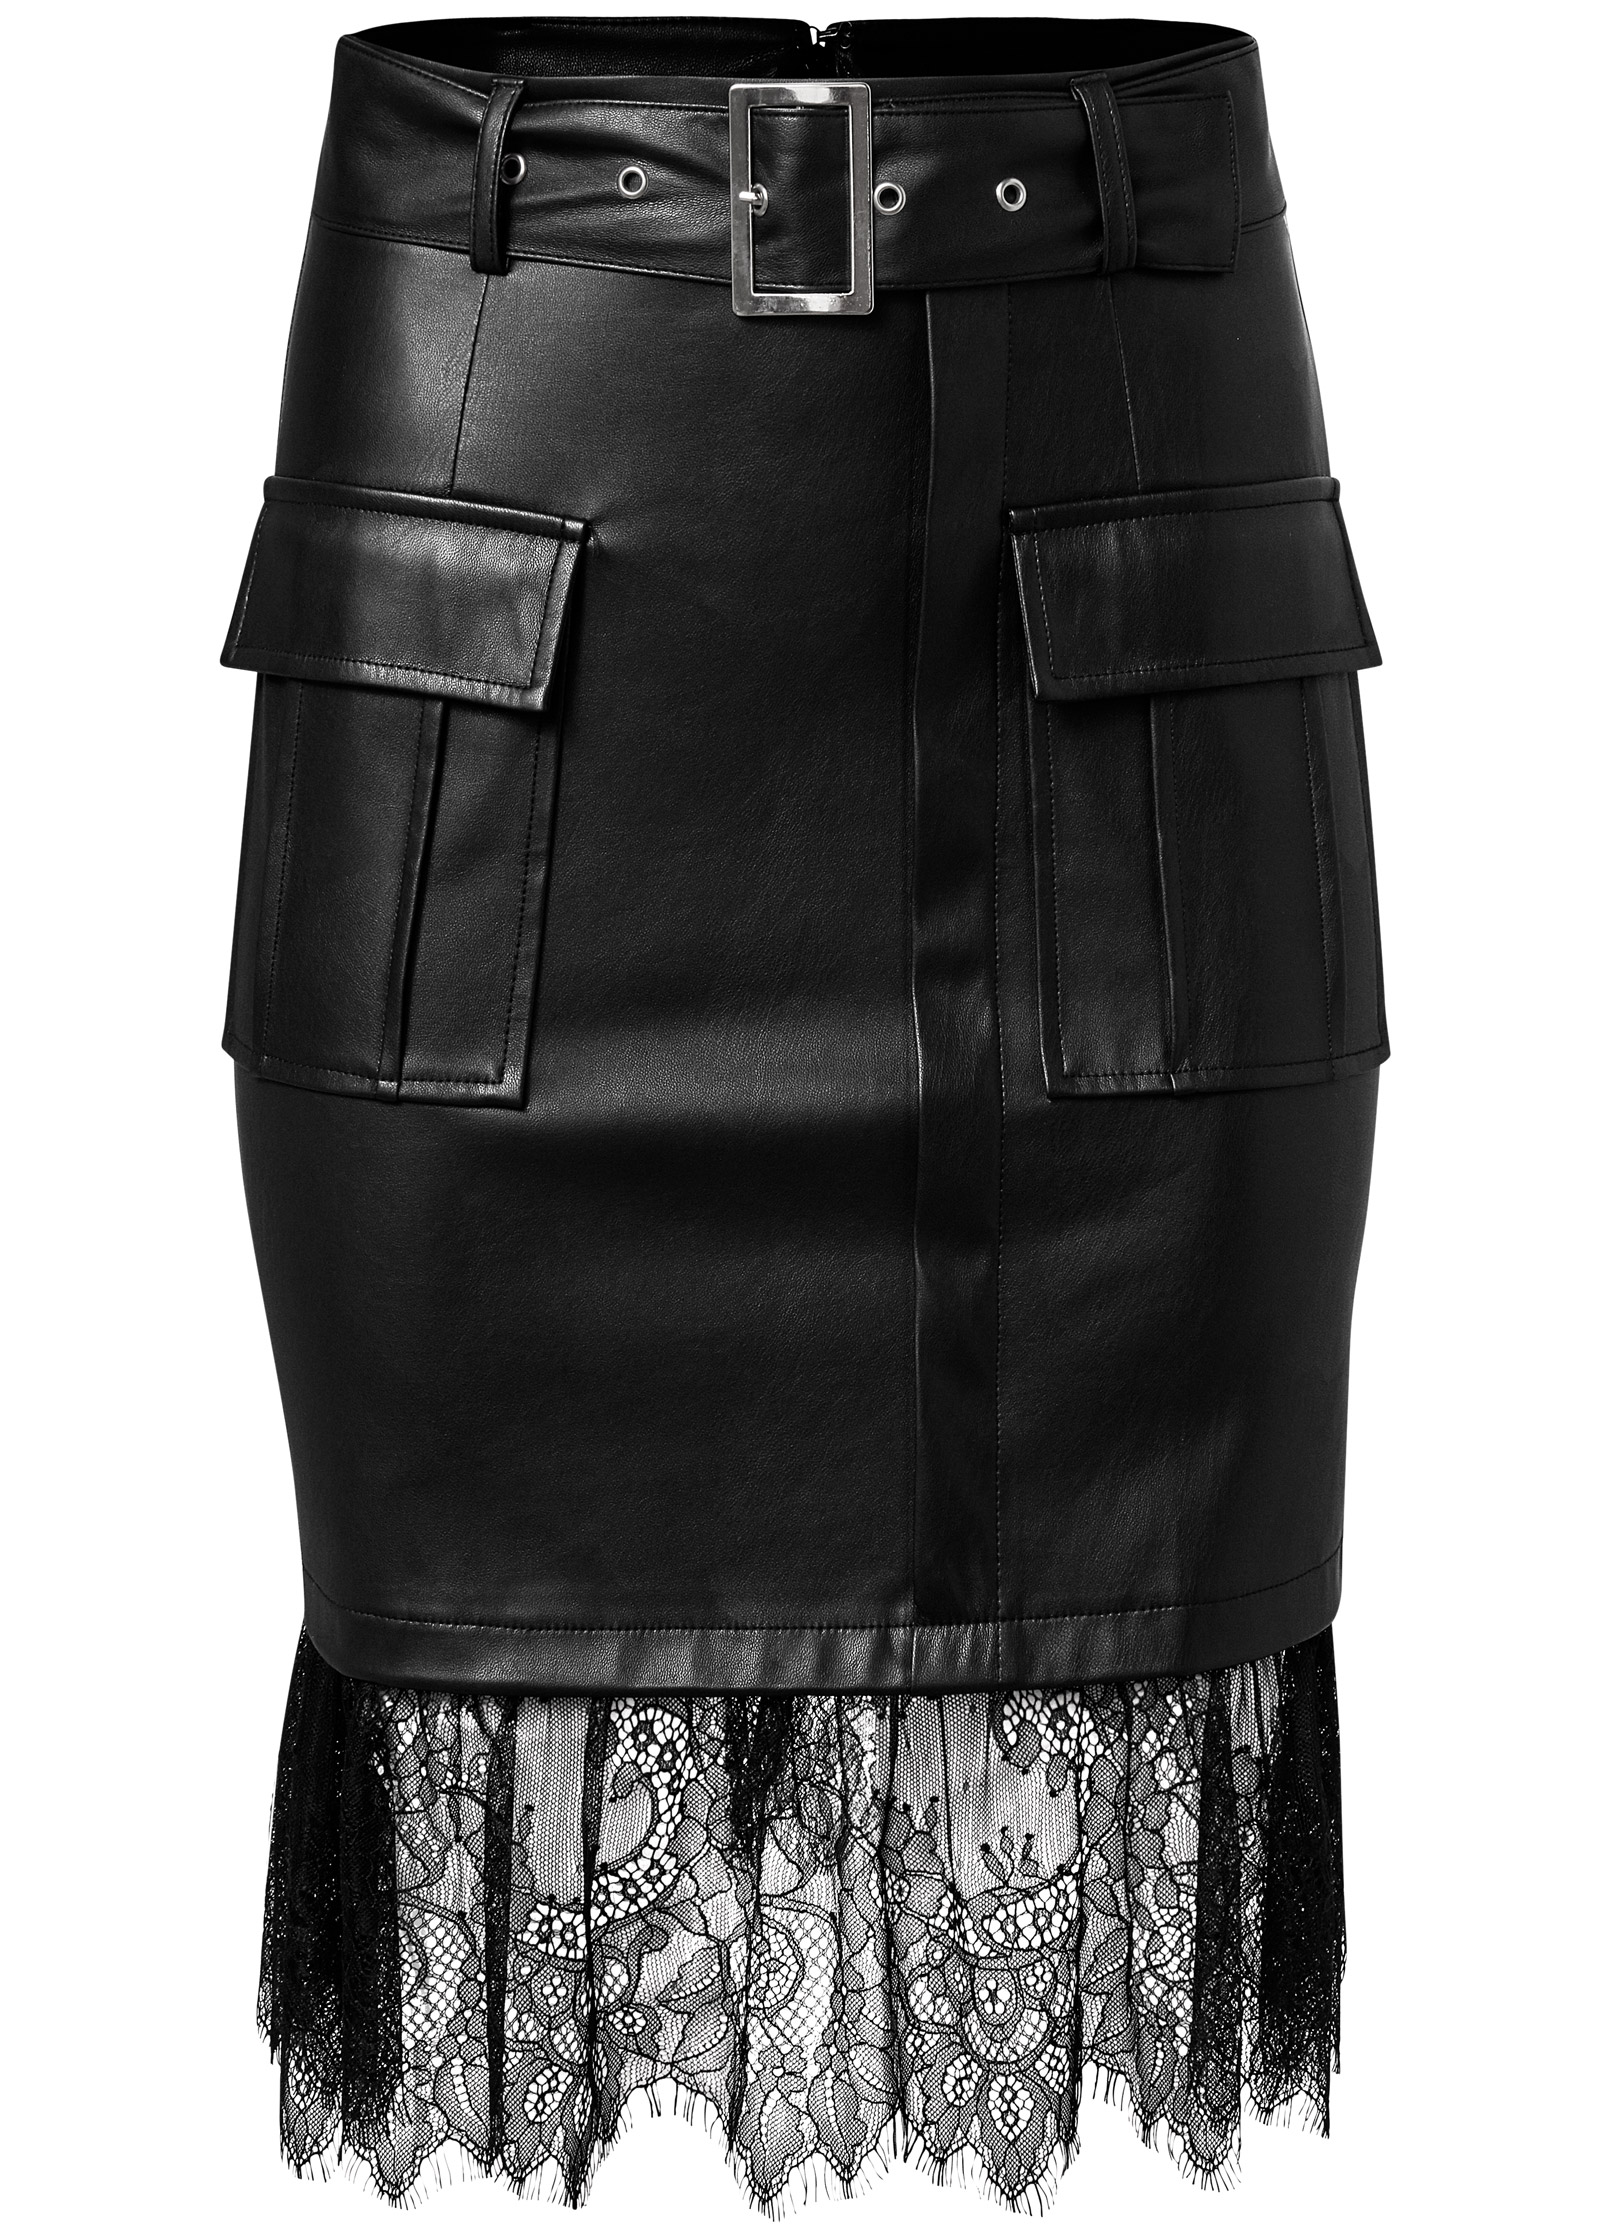 BELTED LACE FAUX LEATHER SKIRT in Black | VENUS